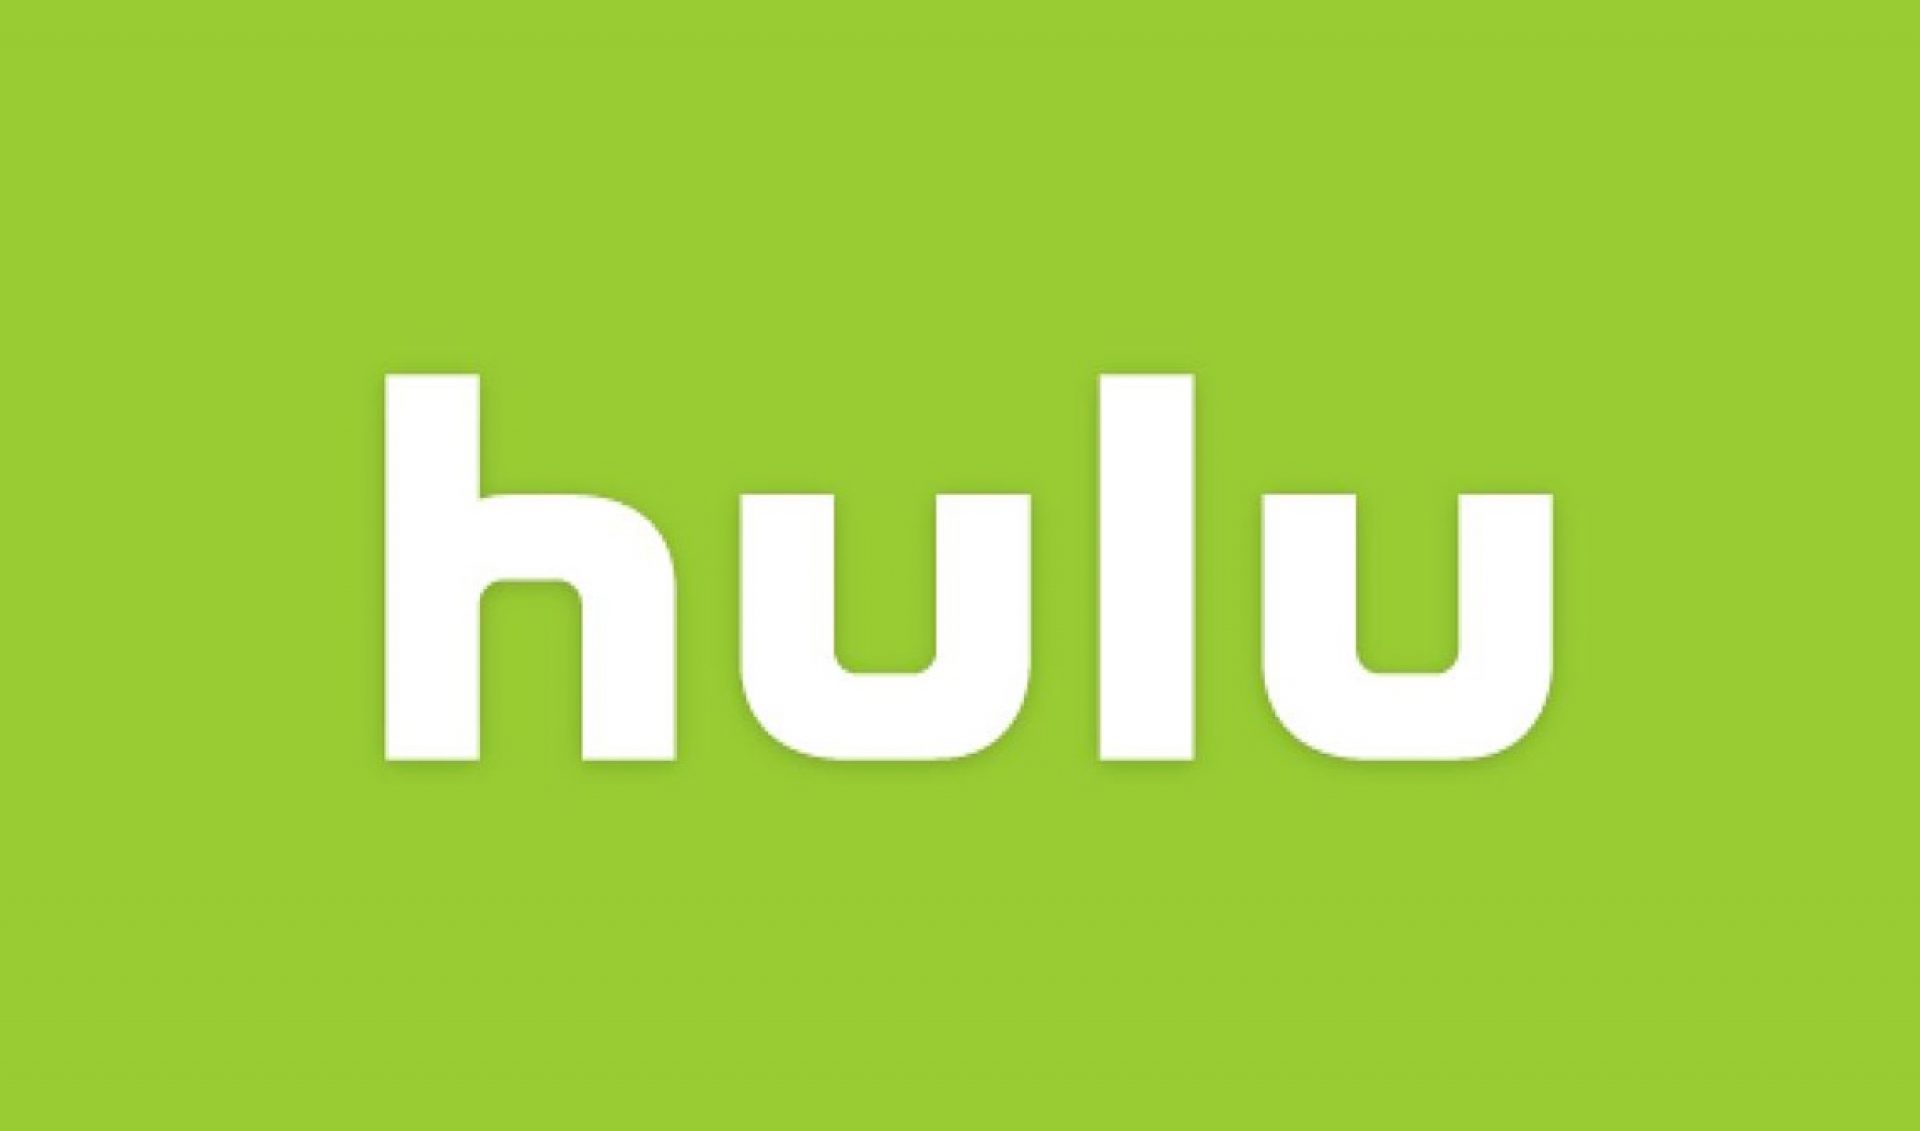 Hulu Confirms Skinny Bundle Of Live TV Channels, Says It’s Poised To Hit 12 Million Subscribers